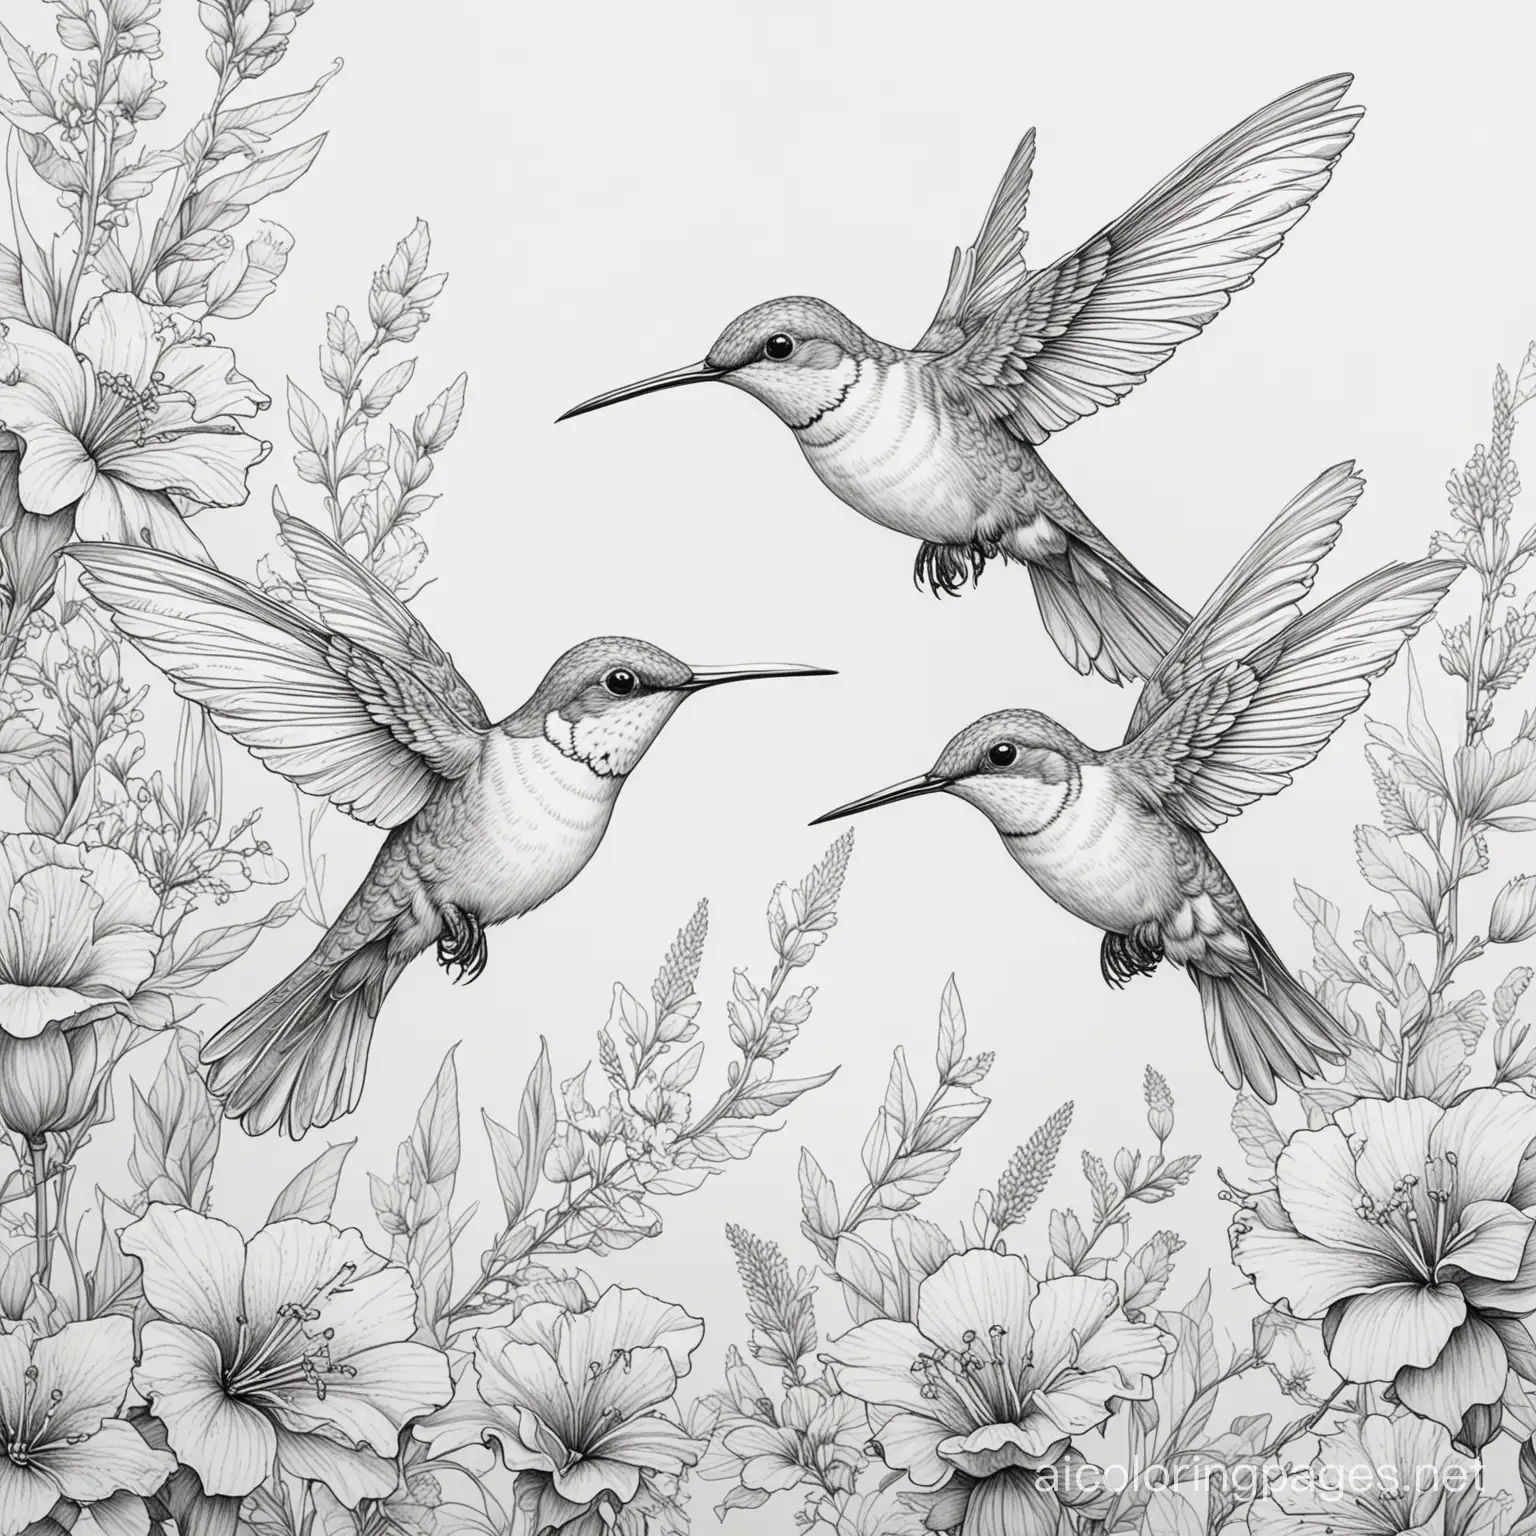 3 humming birds
 on  flowers

, Coloring Page, black and white, line art, white background, Simplicity, Ample White Space. The background of the coloring page is plain white to make it easy for young children to color within the lines. The outlines of all the subjects are easy to distinguish, making it simple for kids to color without too much difficulty